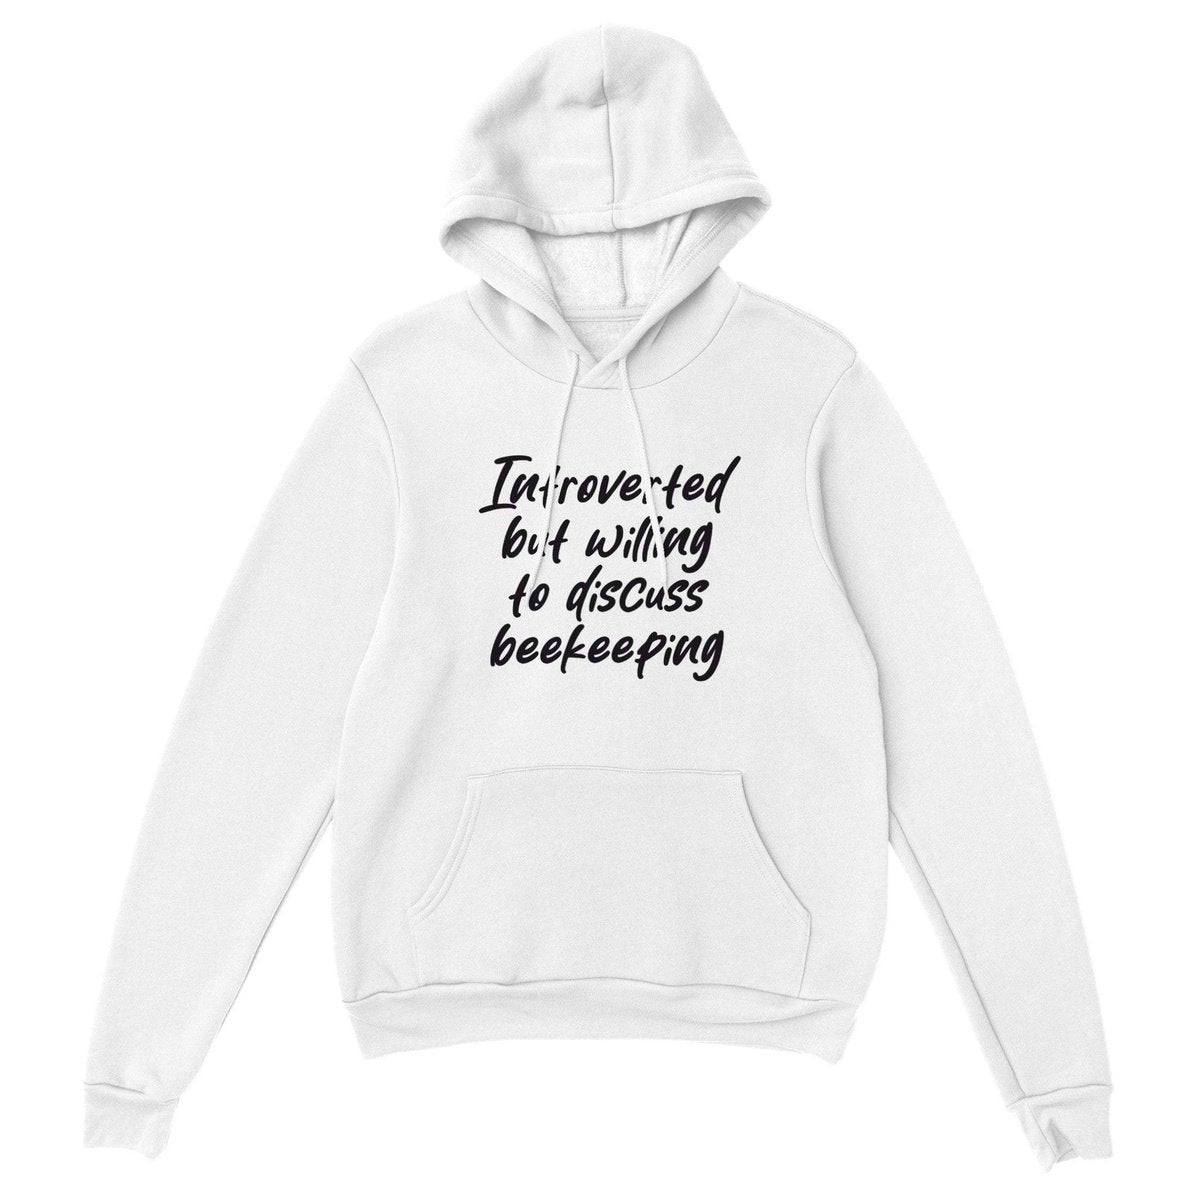 Introverted but willing to discuss beekeeping Hoodie - Premium Unisex Pullover Hoodie Australia Online Color White / XS